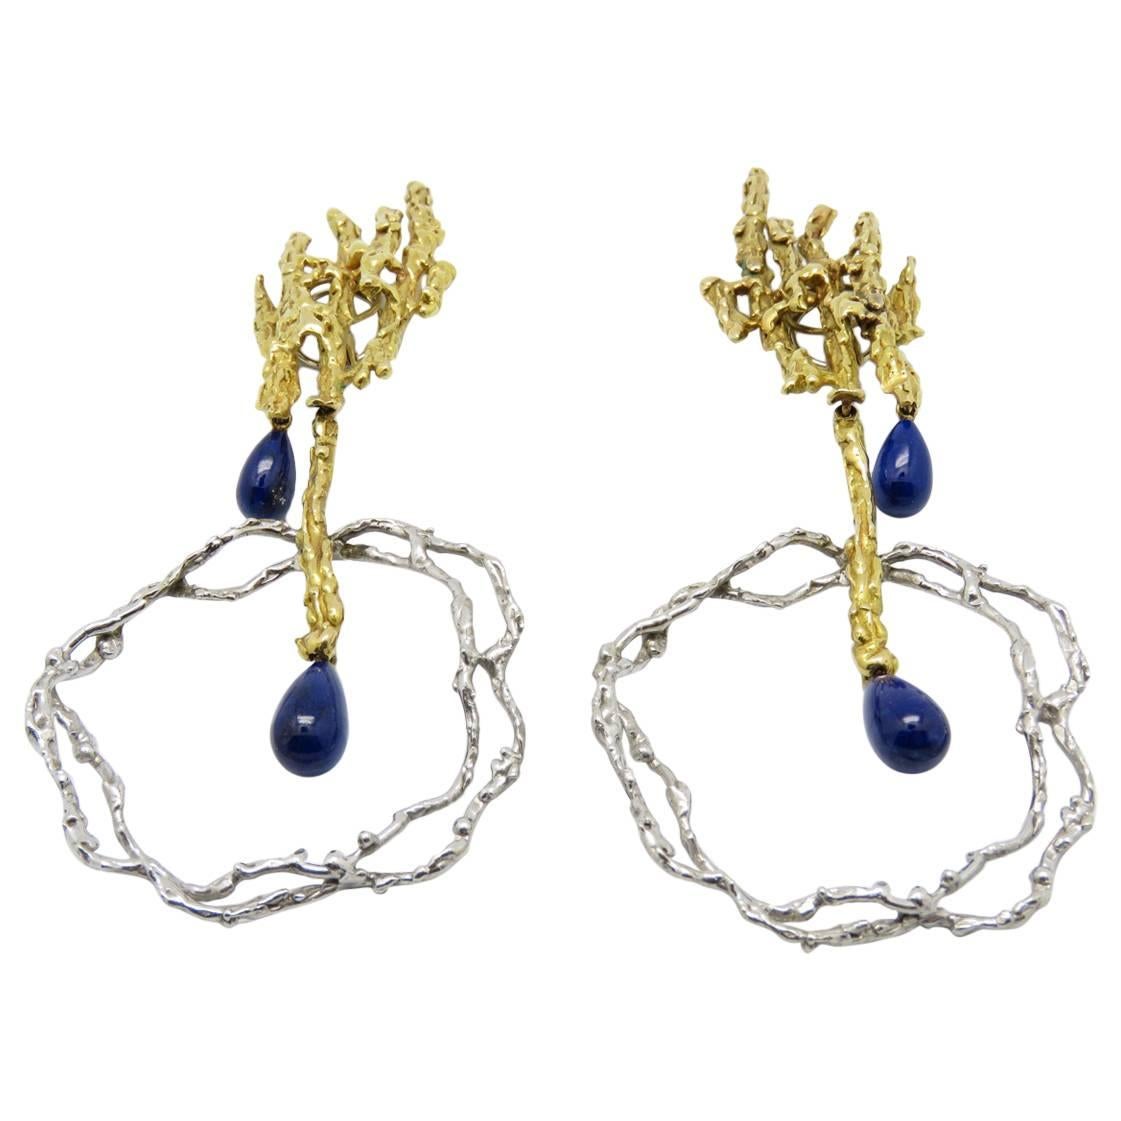 1970s Chaumet Lapis Lazuli Yellow and Grey Gold Ear Clips.